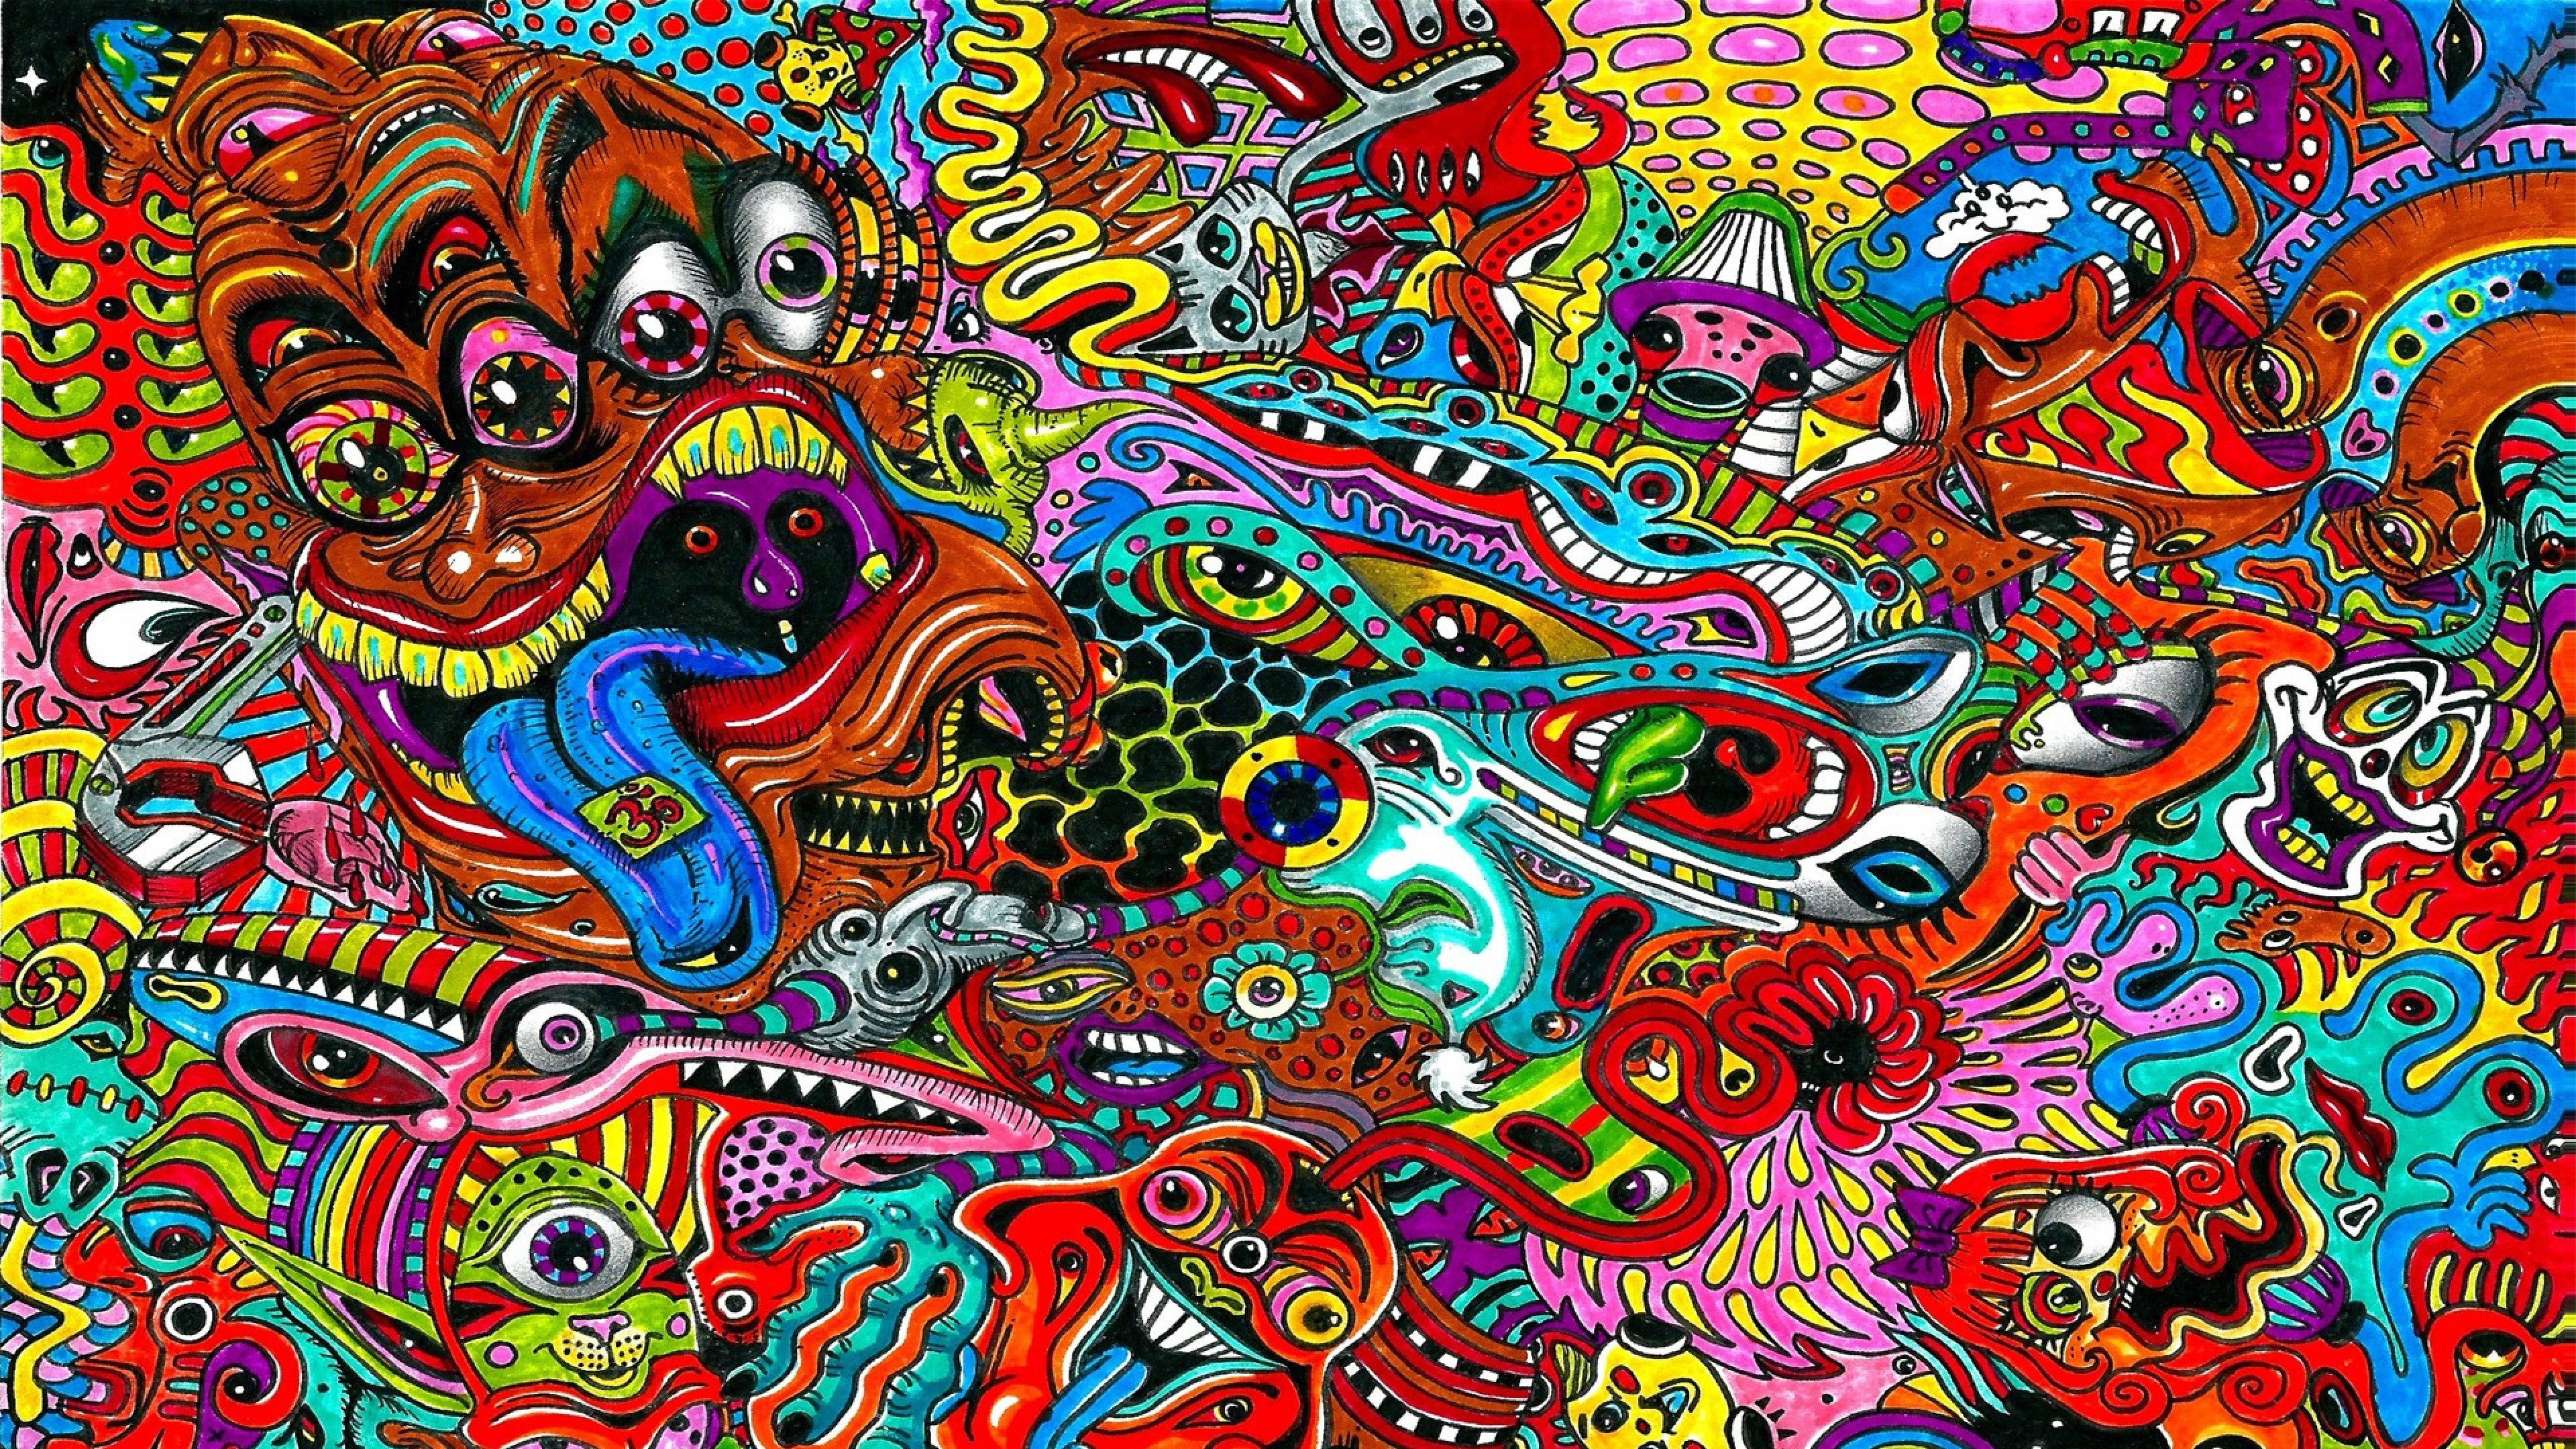 3840x2160 Surreal Colorful Psychedelic Wallpaper Background 4K Ultra HD 